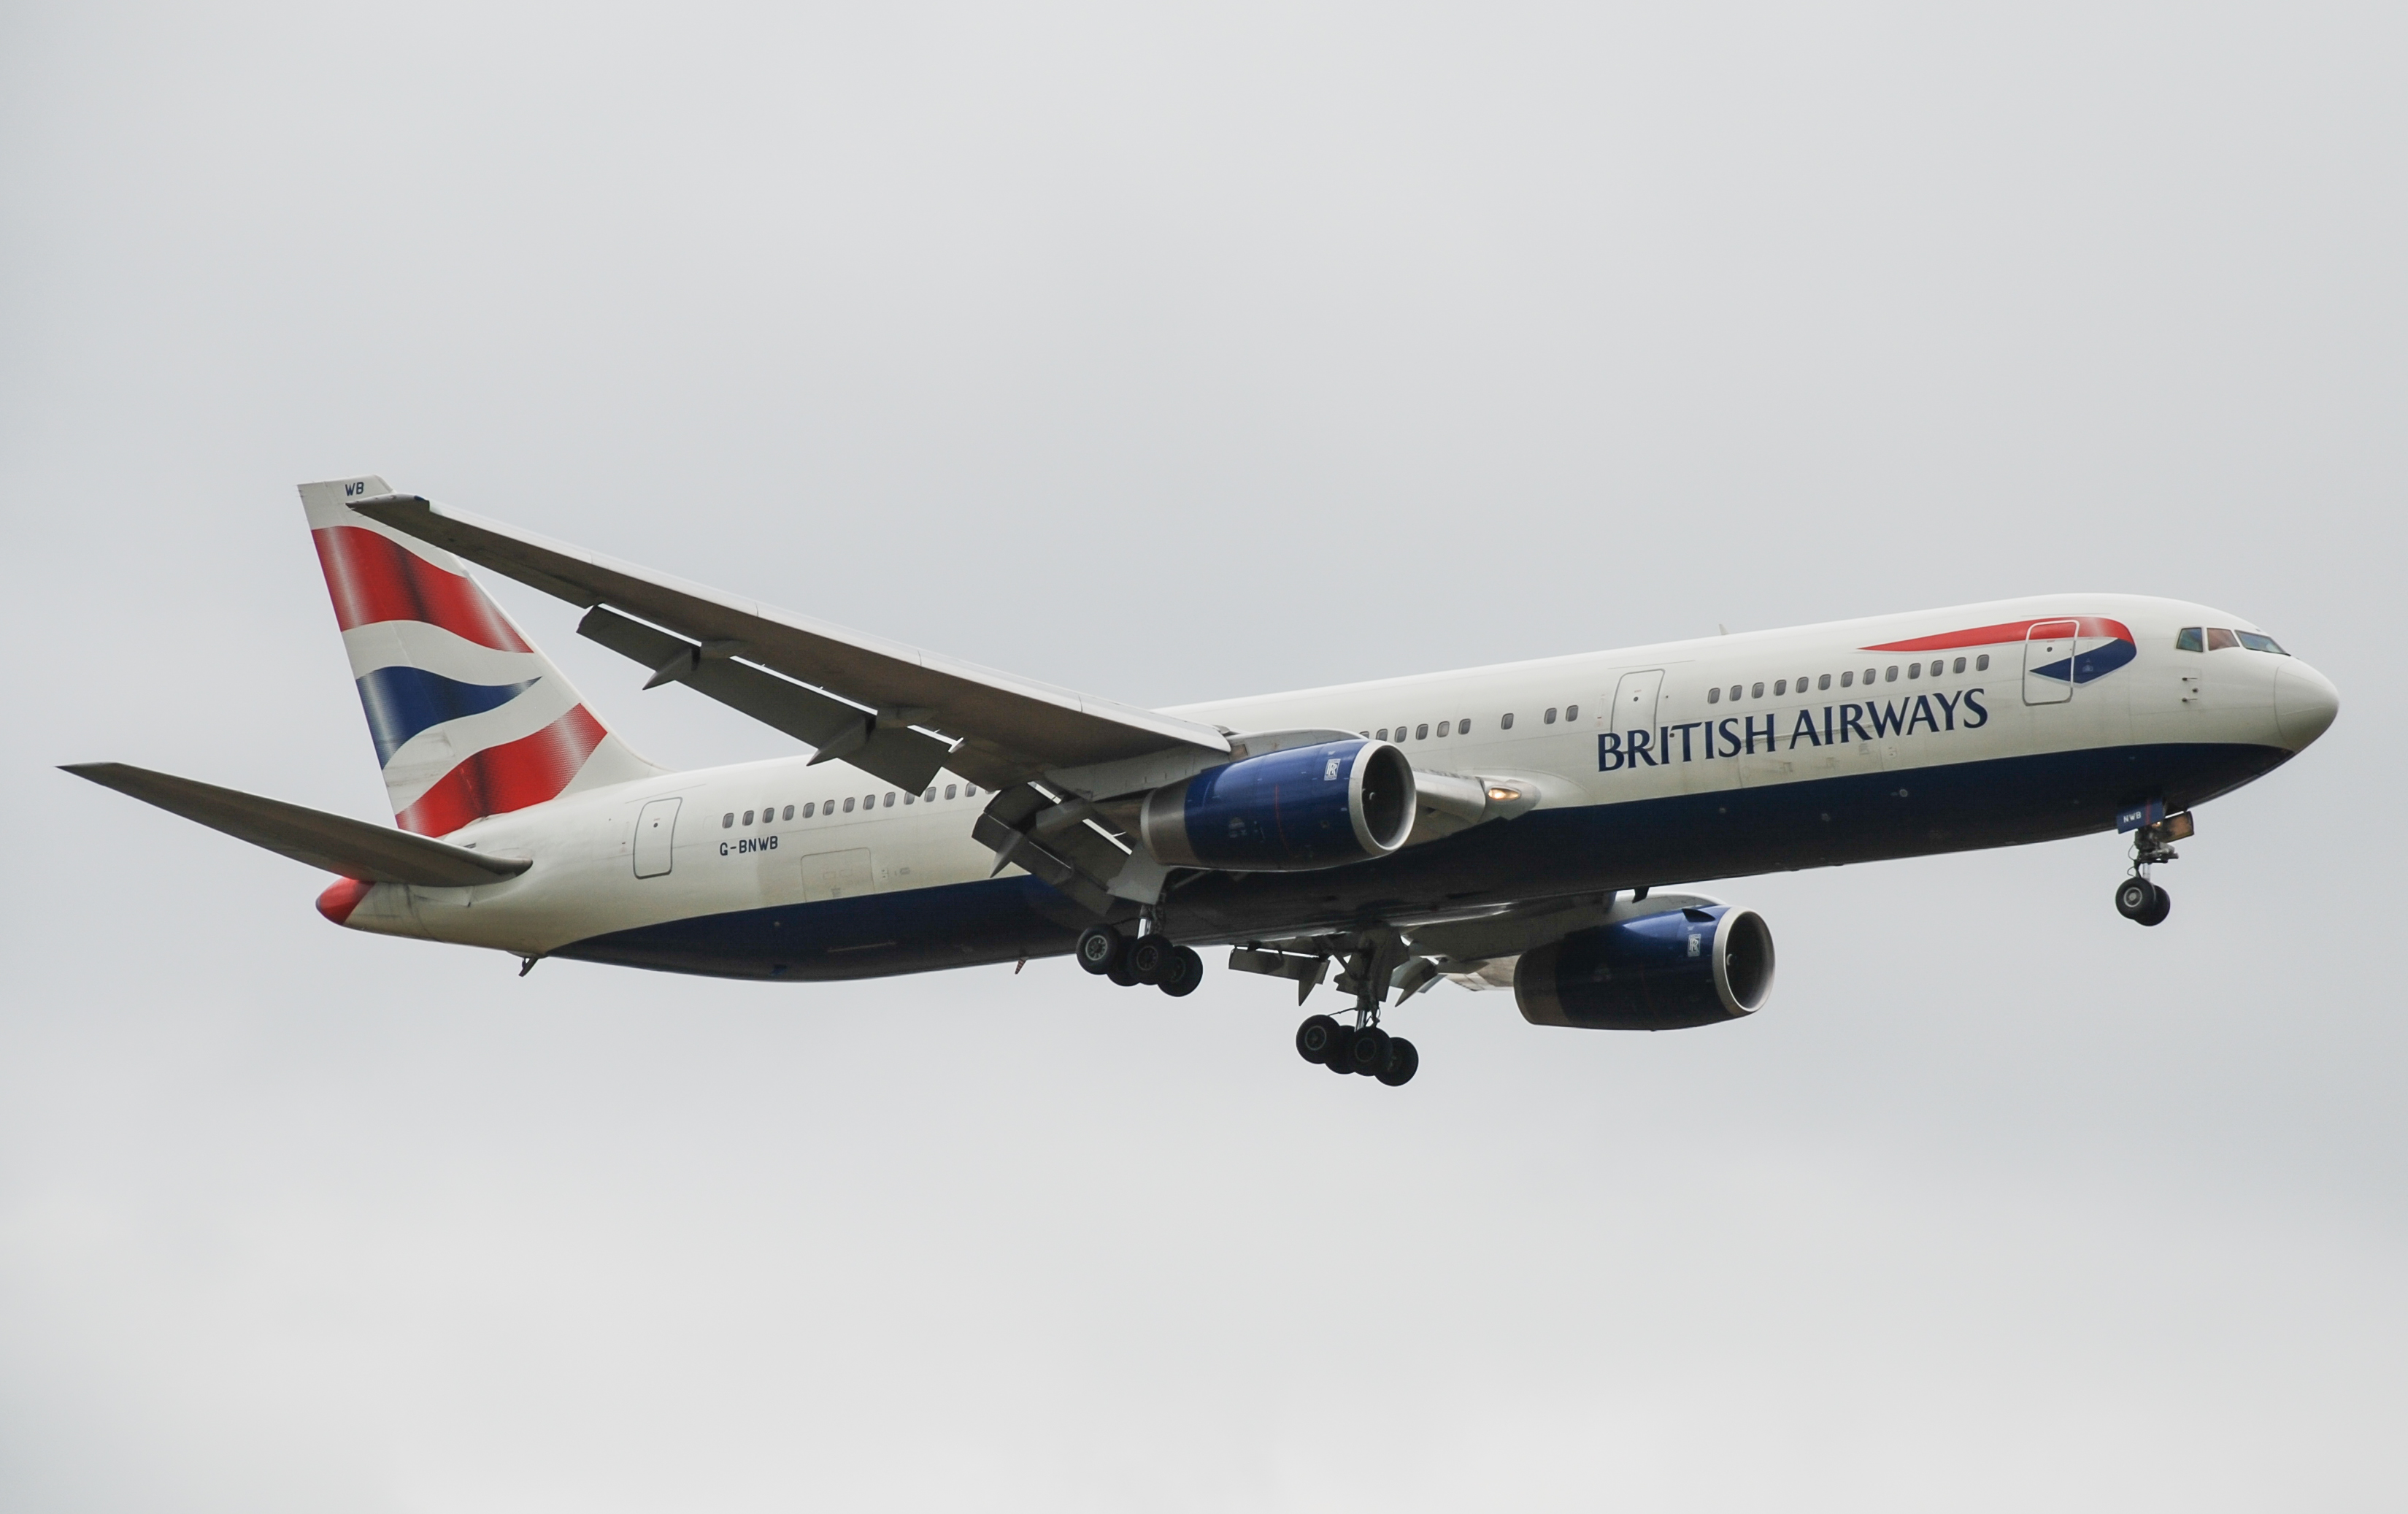 G-BNWB/GBNWB Withdrawn from use Boeing 767 Airframe Information - AVSpotters.com